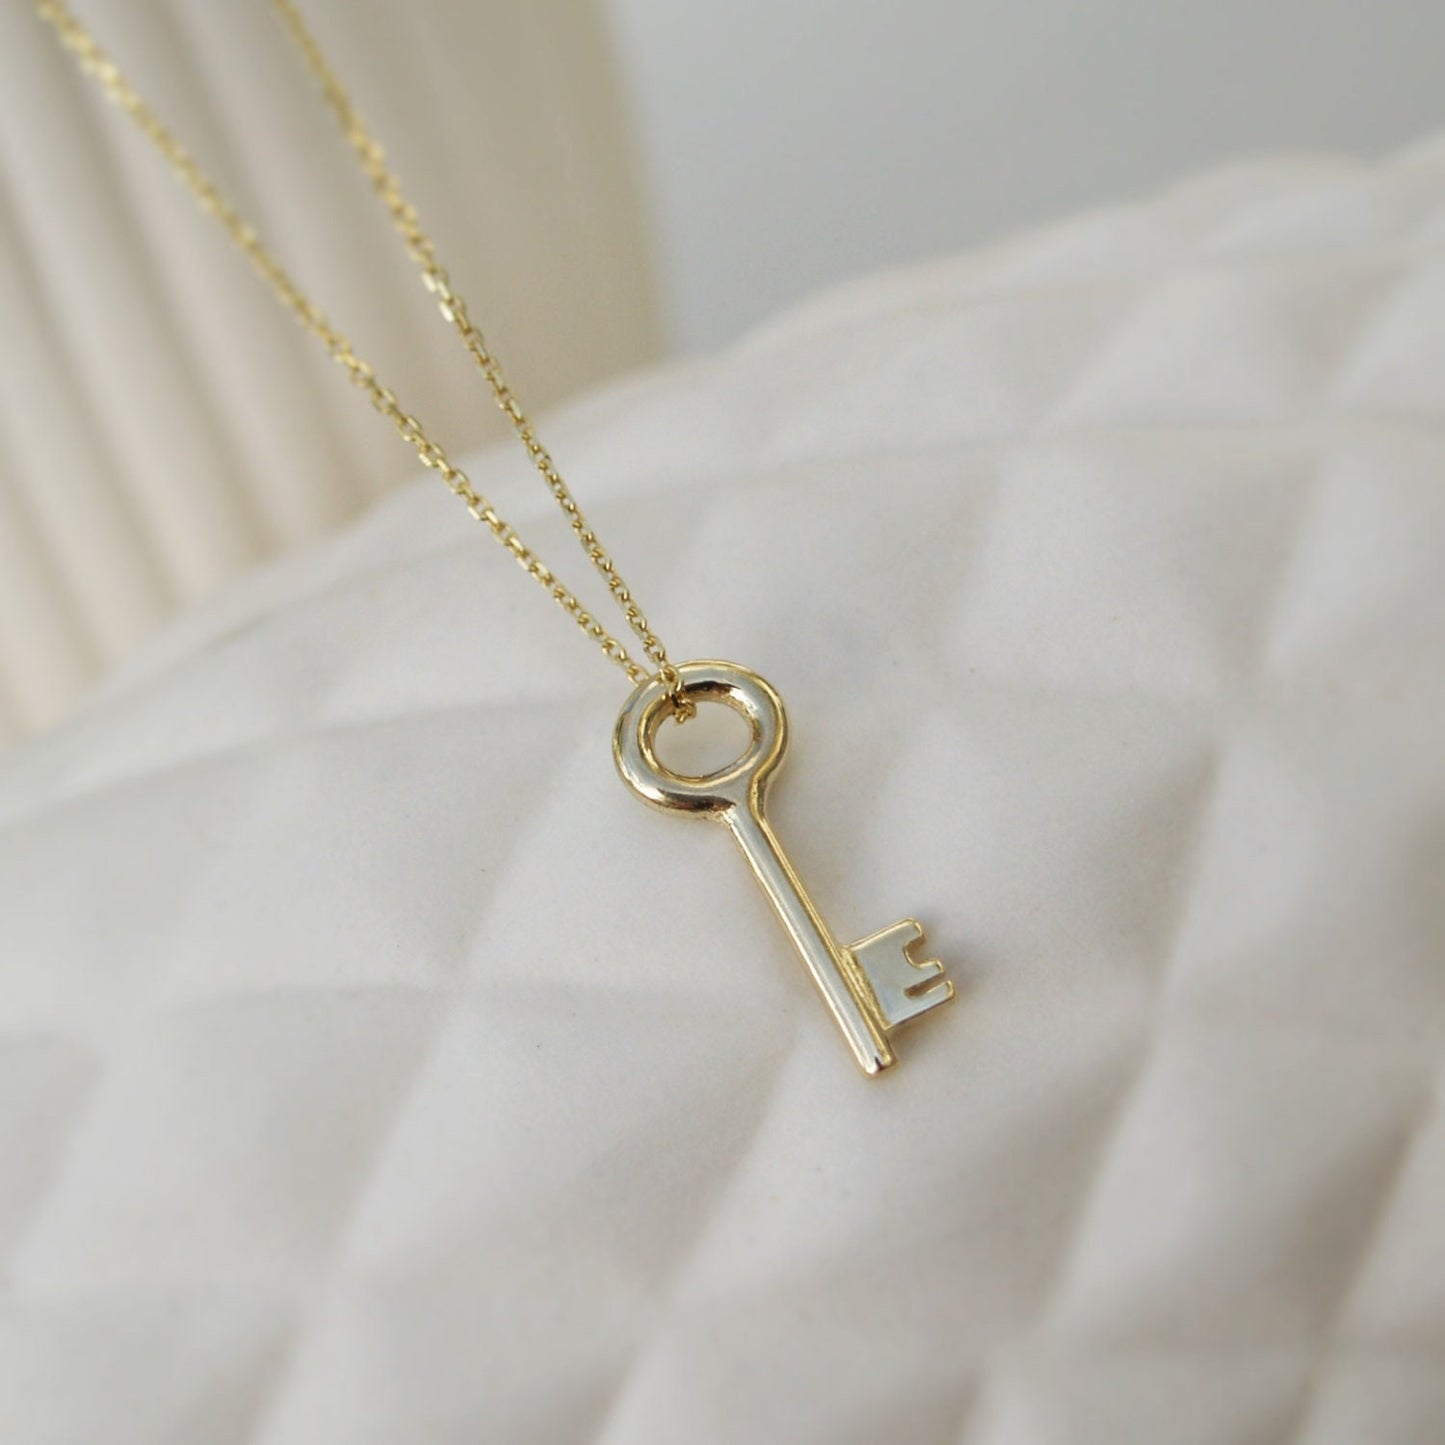 9ct solid yellow gold small and dainty key charm pendant and chain